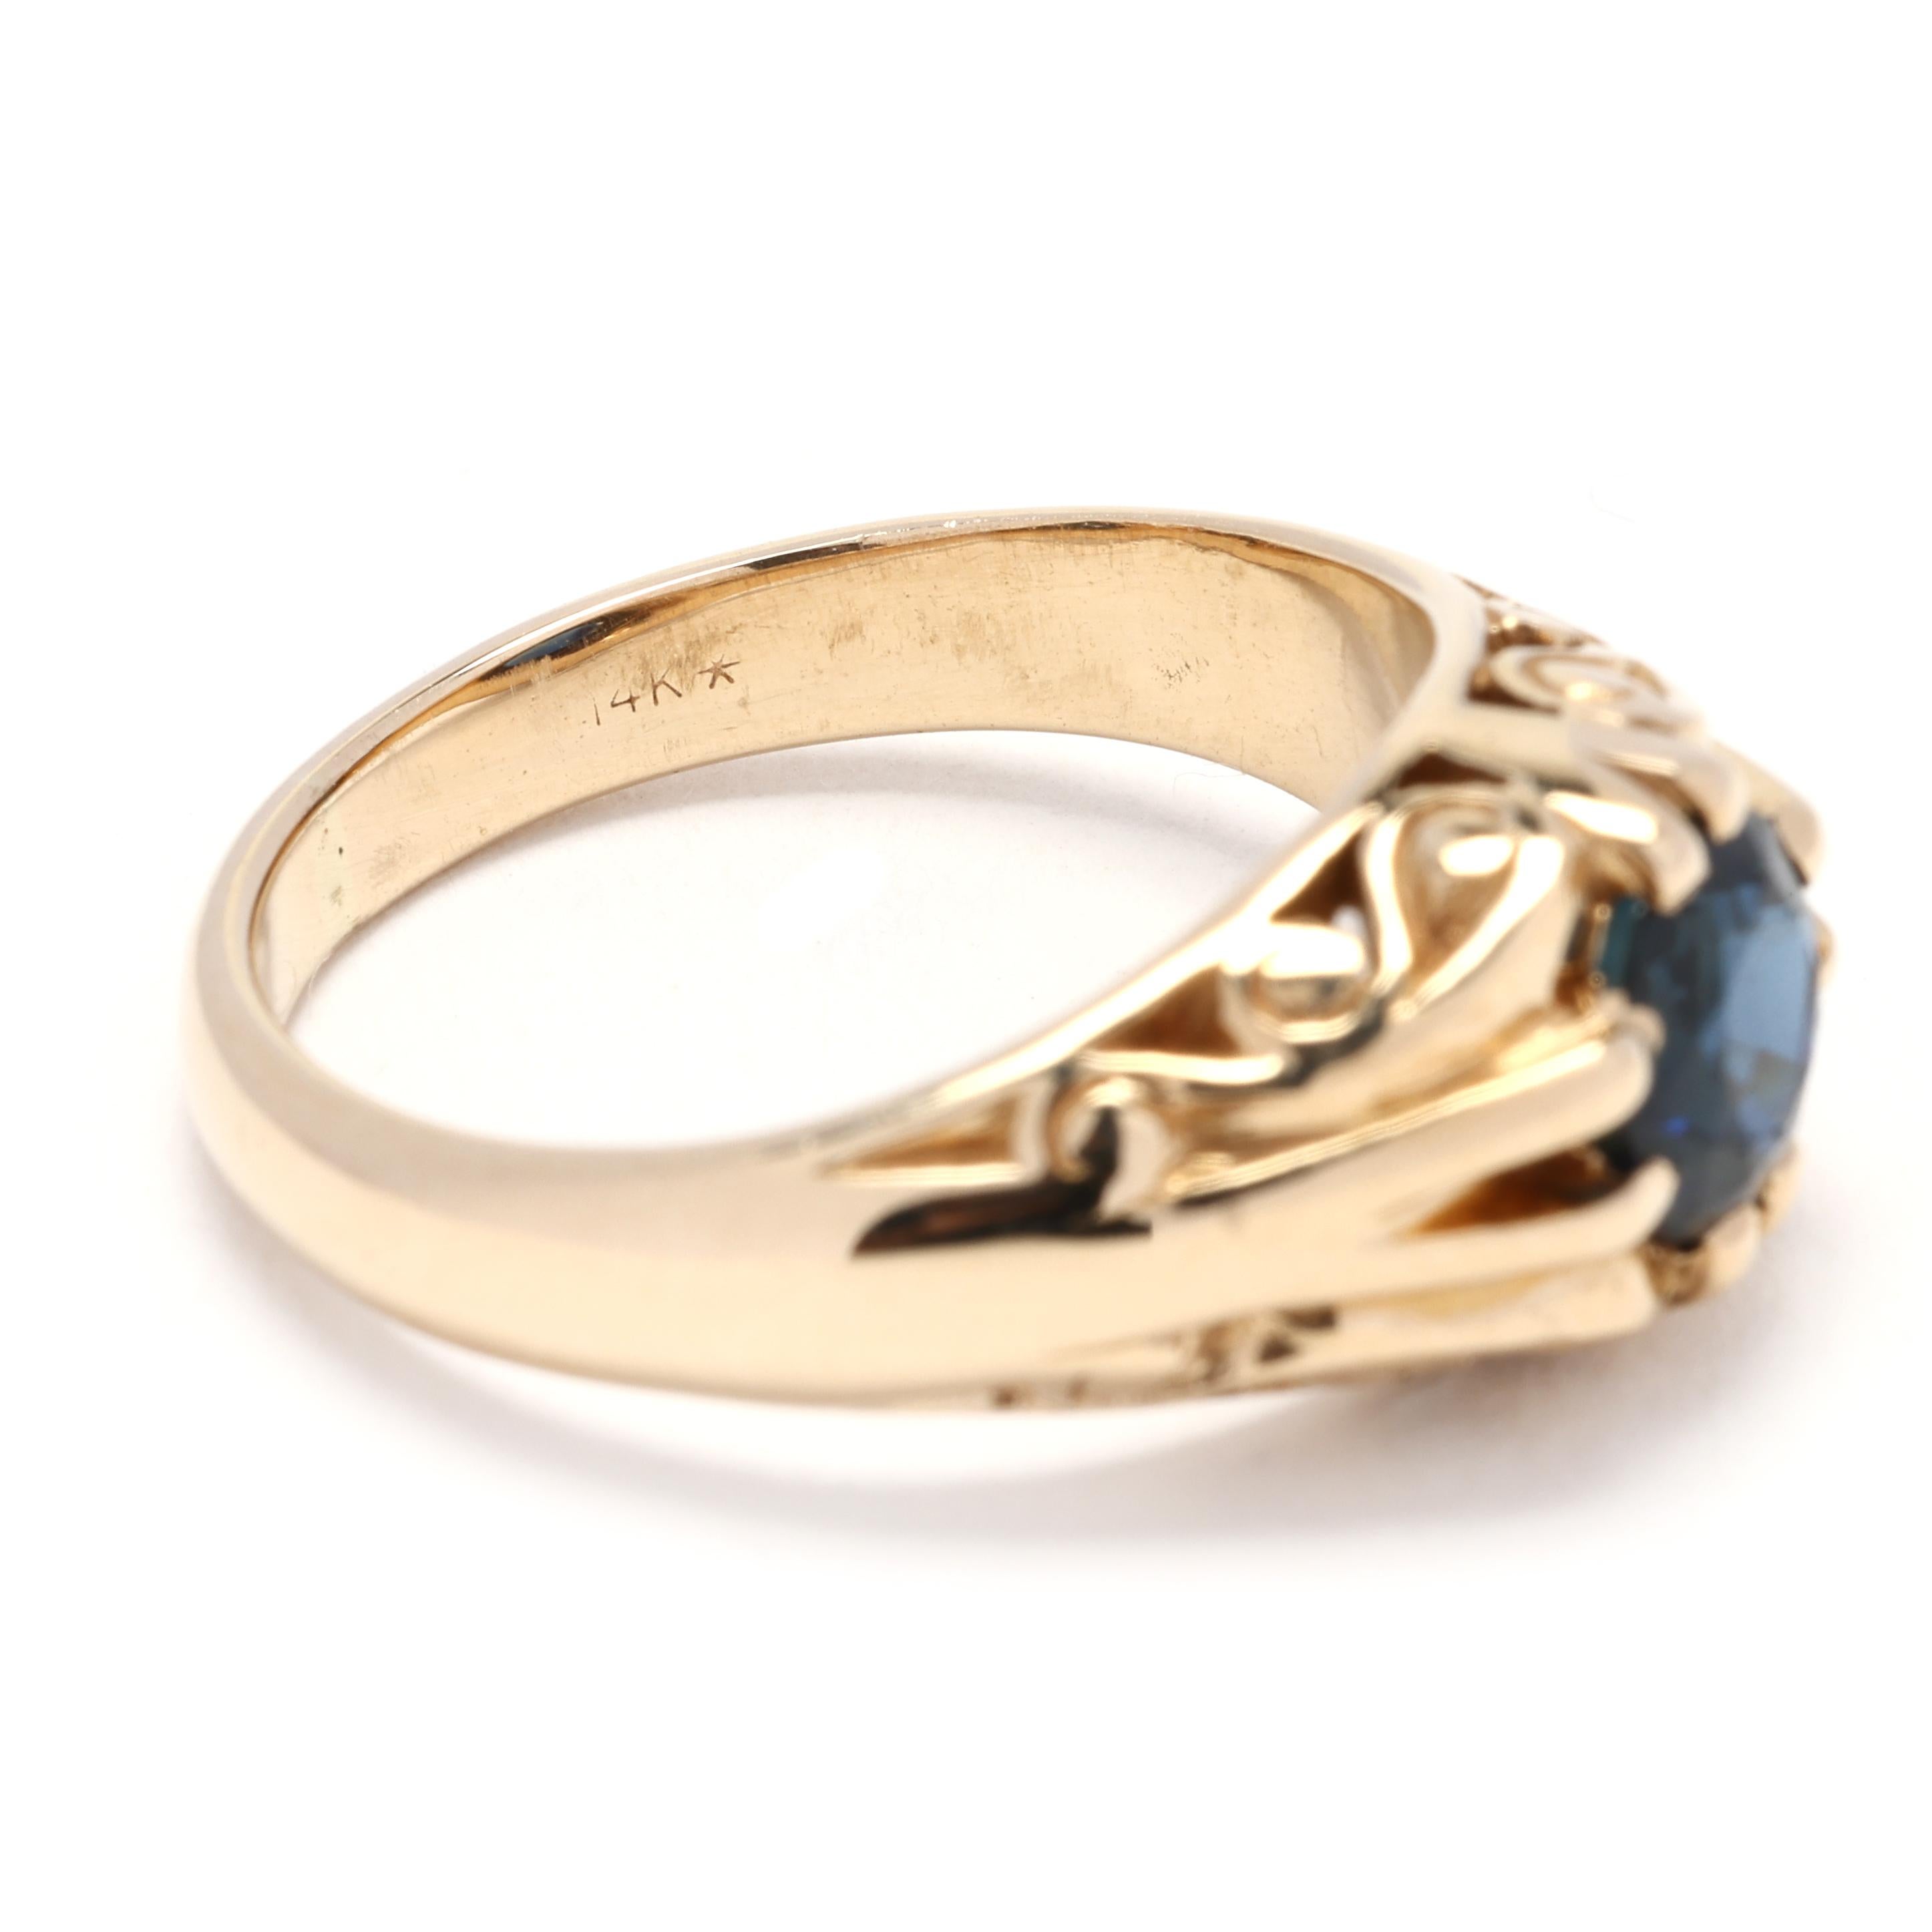 Women's or Men's 0.50ctw Sapphire Swirl Ring, 14k Yellow Gold, Ring Size 4.75, Antique Ring For Sale